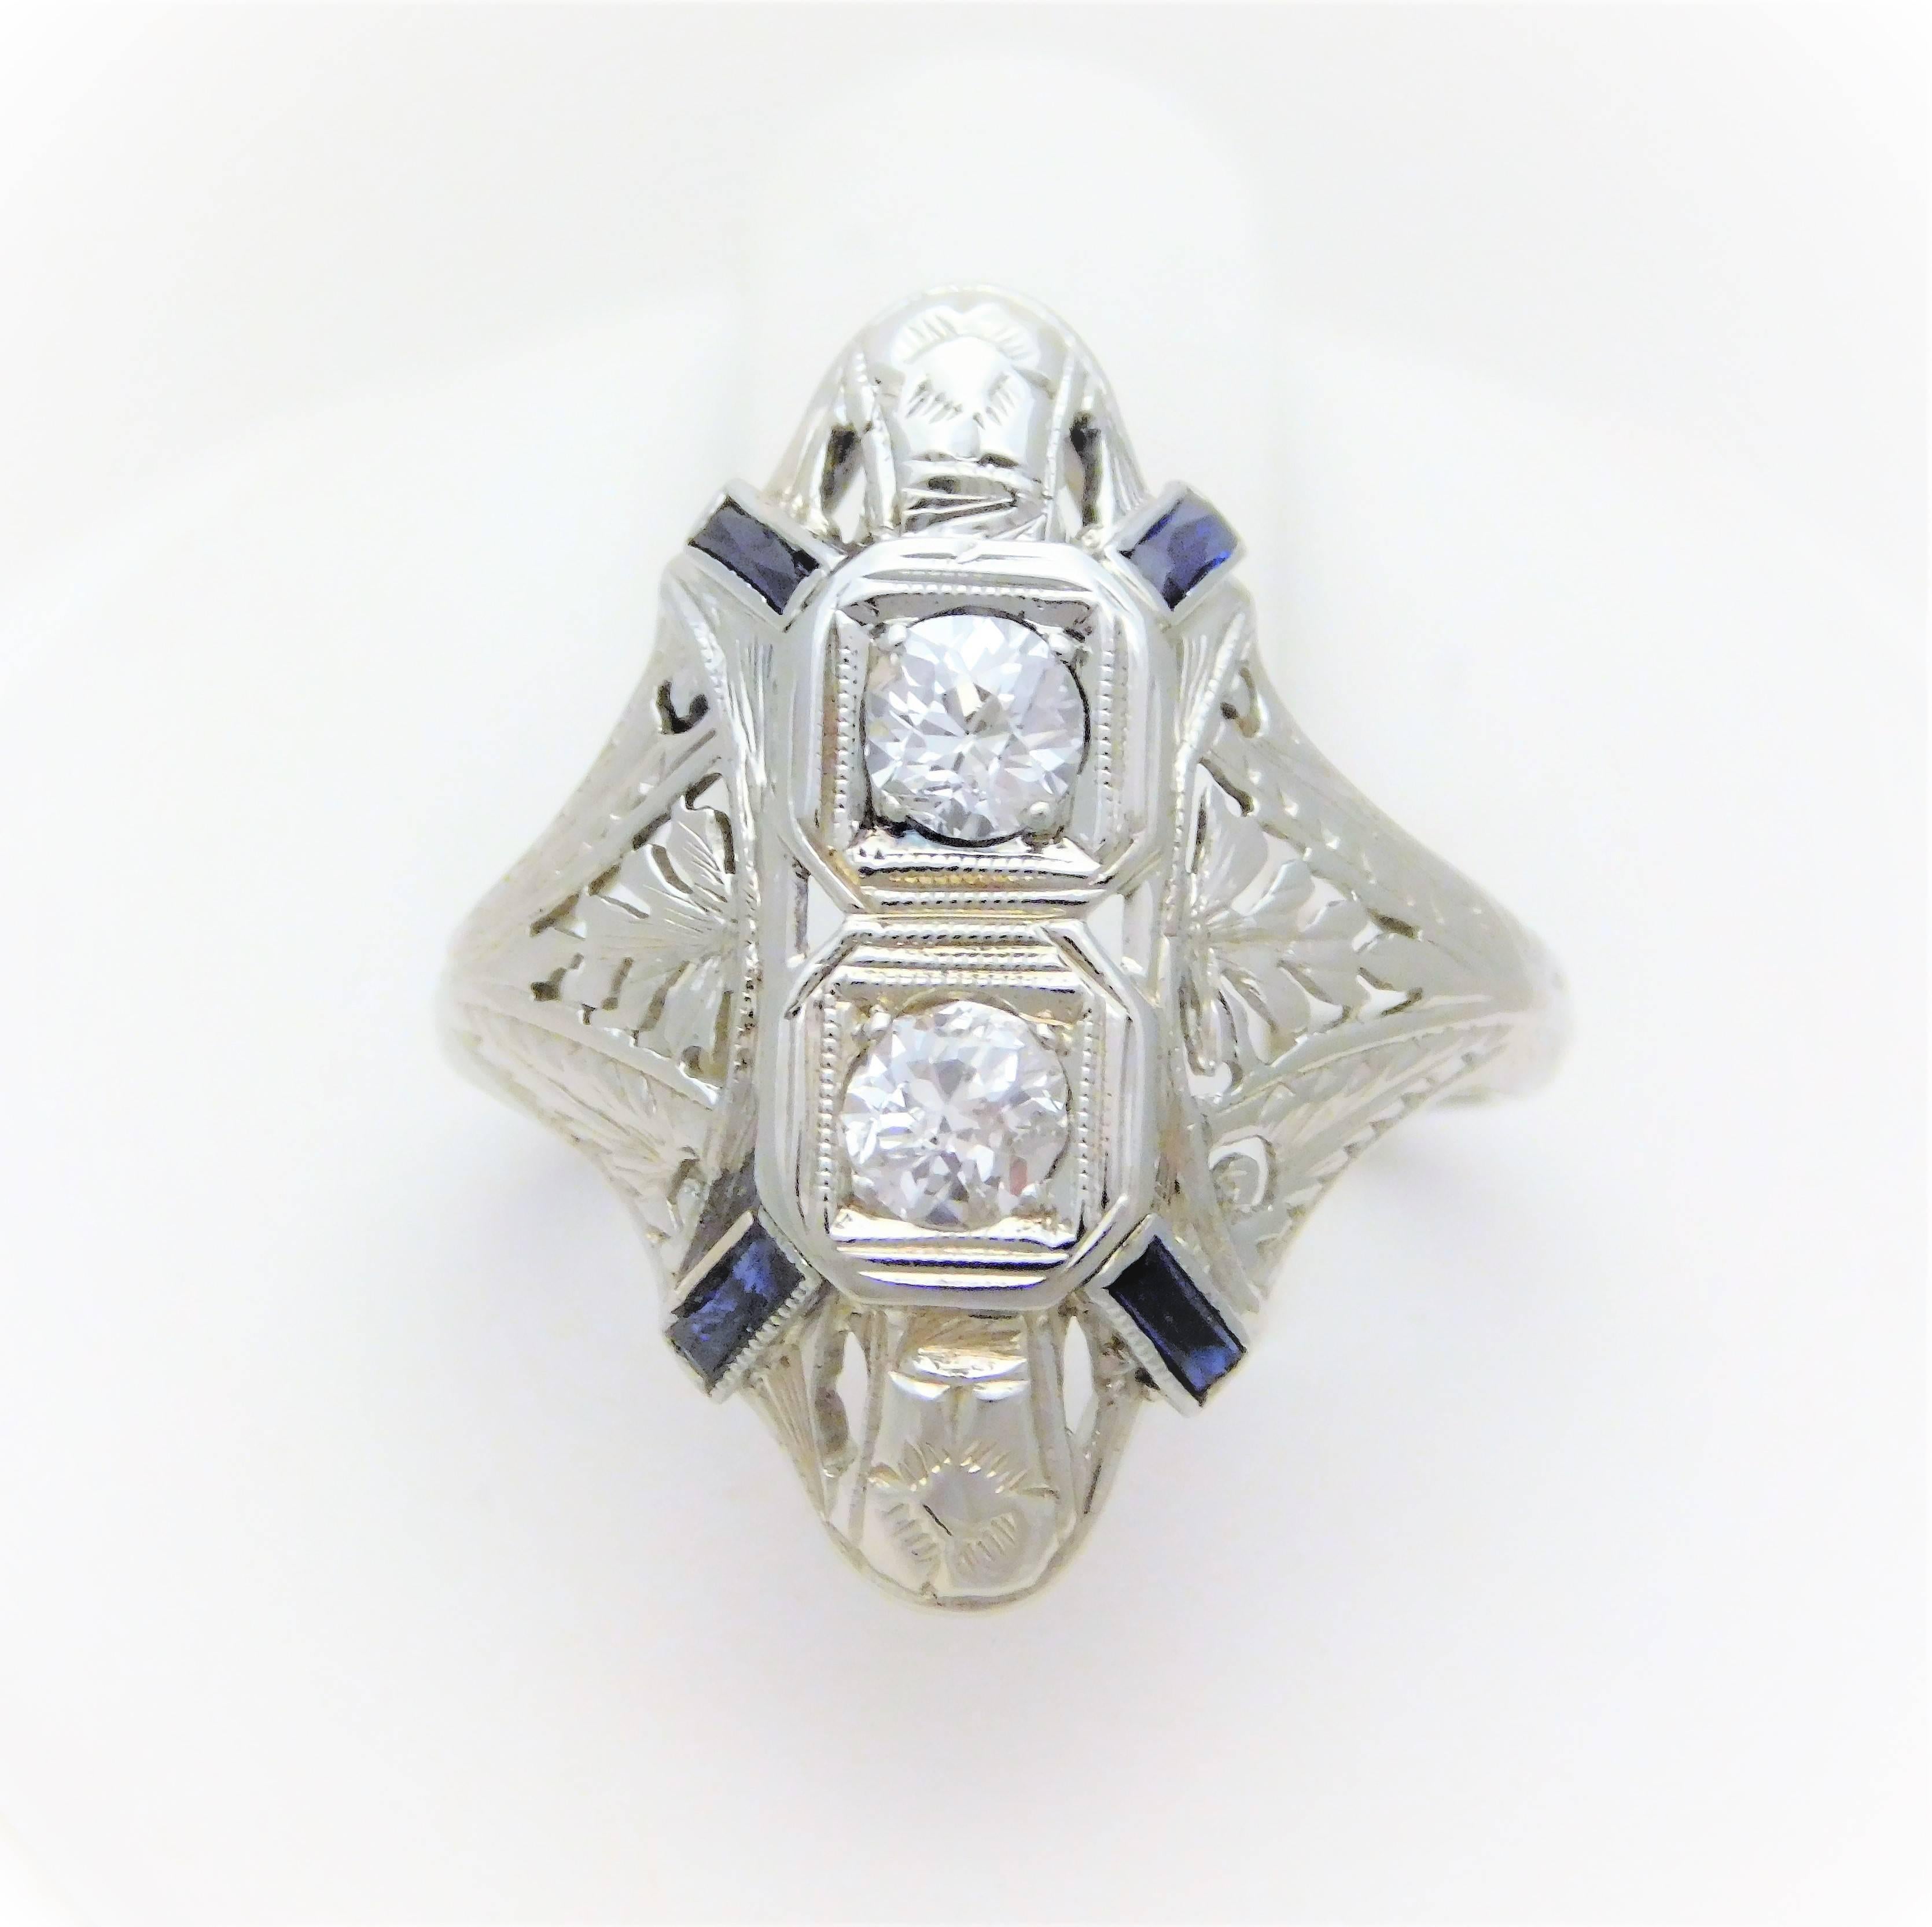 From a lovely New Orleans estate. Circa Early 20th Century. The shield ring design was one of the most popular designs from 1900-1930. This beautiful example has been hand crafted in solid 18k white gold. It has been masterfully jeweled with two Old